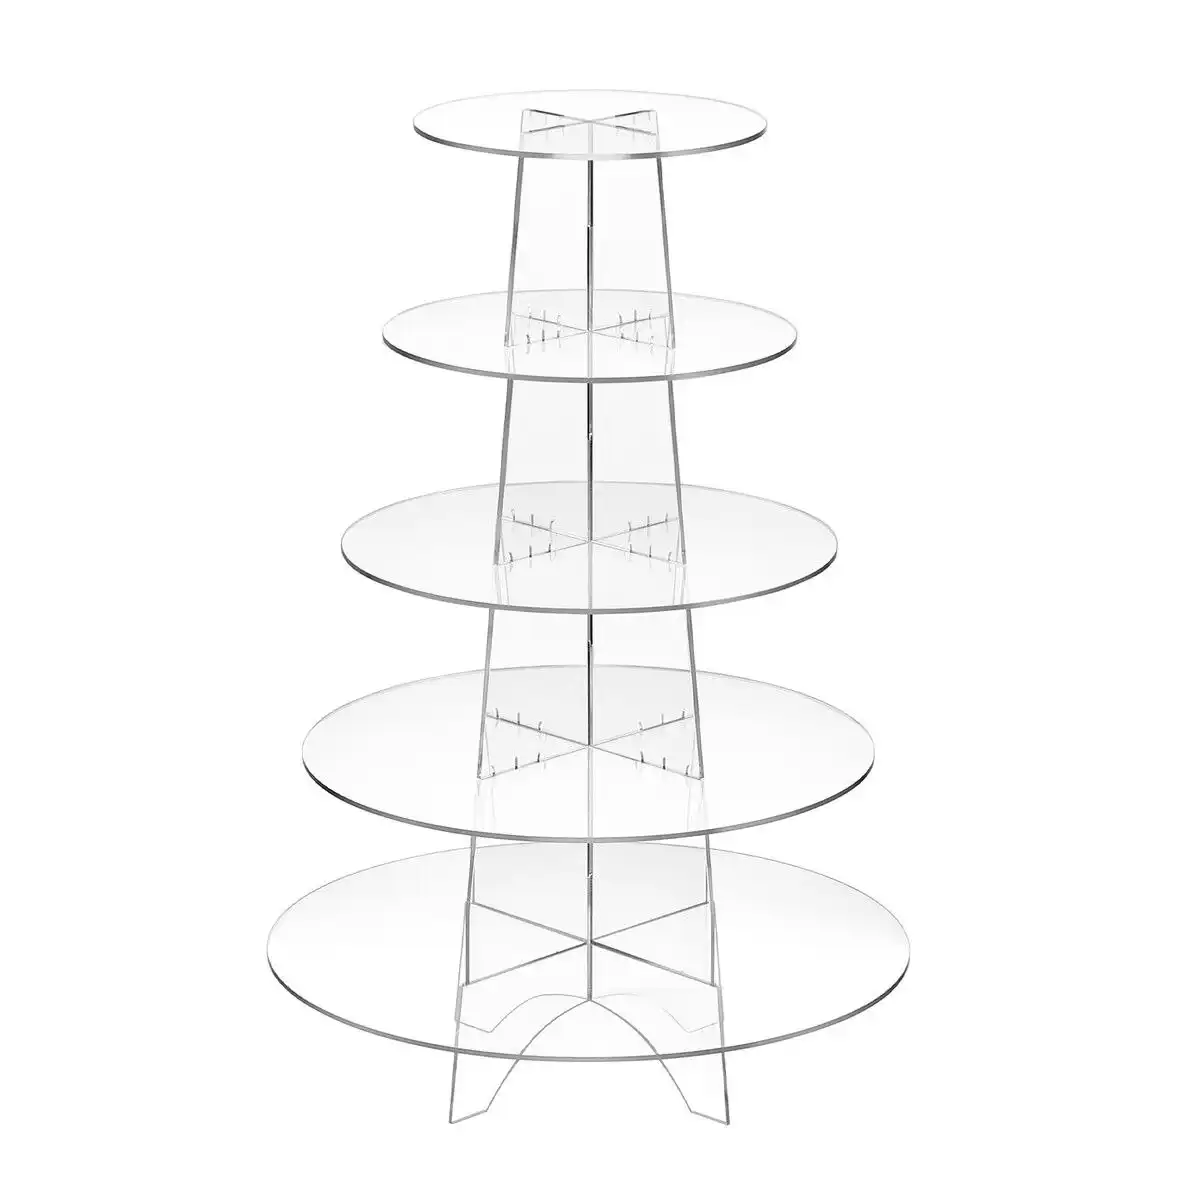 Ausway Acrylic Cupcake Stand 5 Tier Display Shelf Tower Unit Bakery Cake Donut Model Pastry Holder Round Clear for Wedding Party